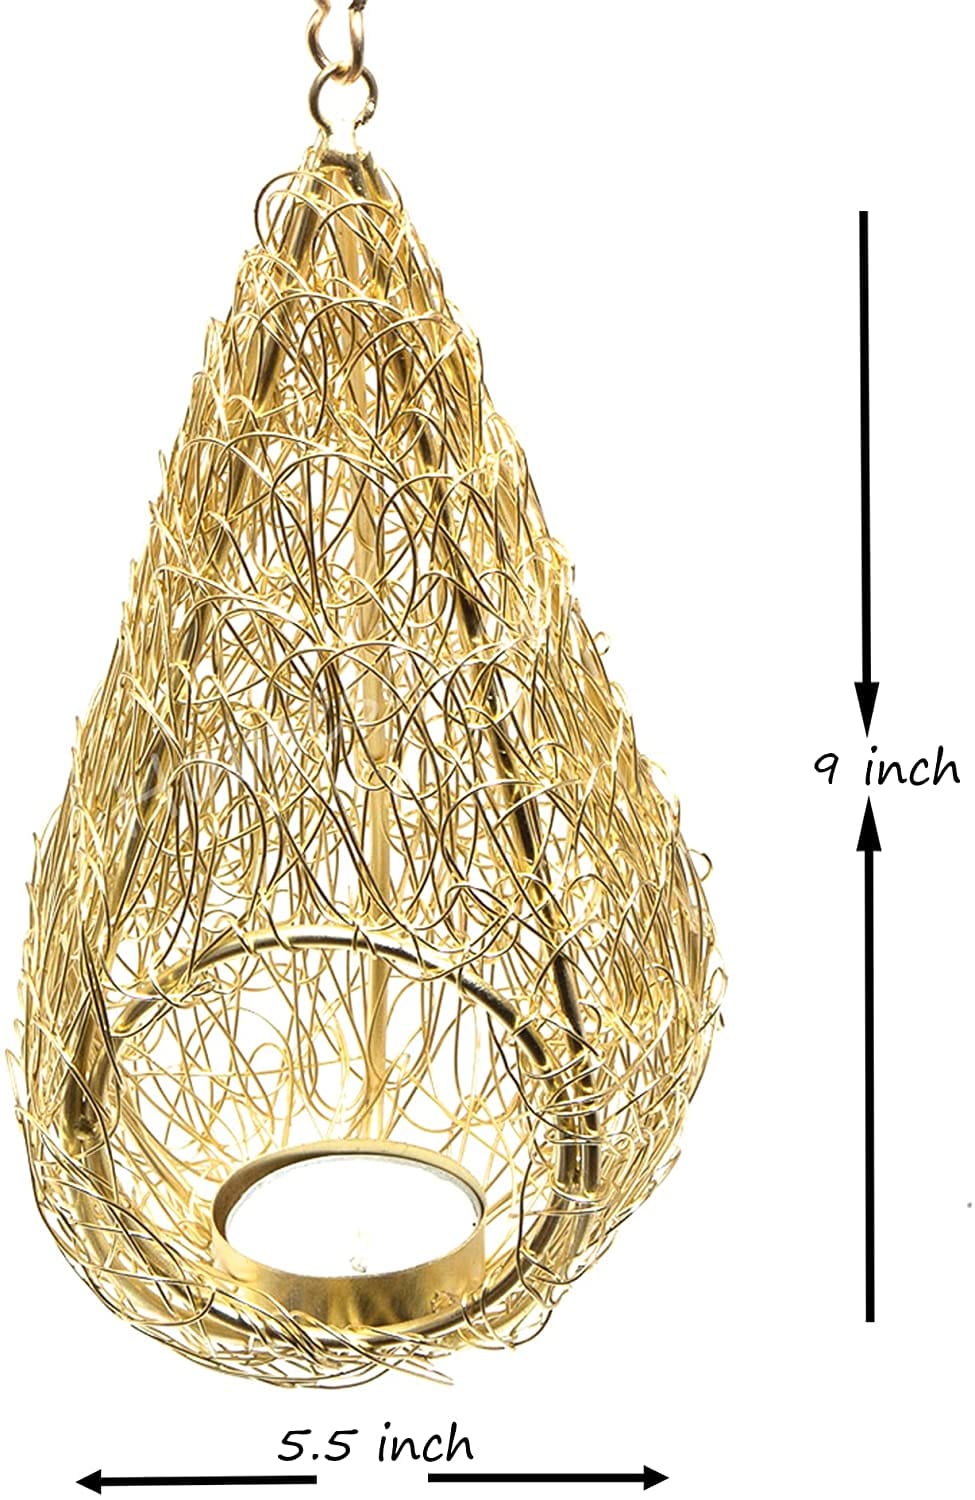 LAMANSH ® decorative cage candle holder Golden LAMANSH® Pack of 35 pcs Decorative Metal Gold Bird's Nest Hanging Tealight Candle Holder for Corporate Gifting 🎁